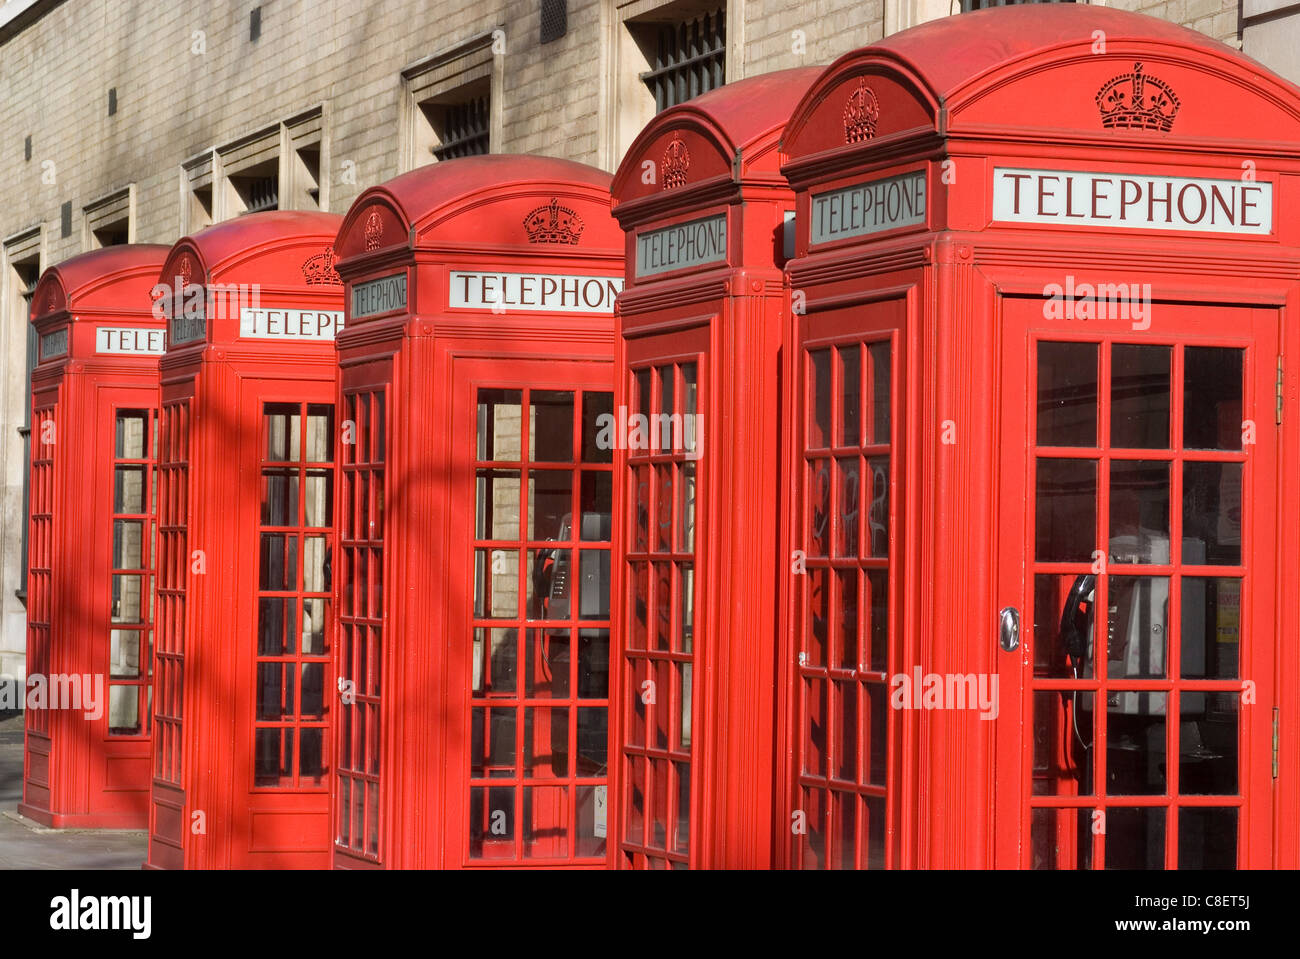 Row of old-fashioned red telephone boxes, Broad Court, near the Royal Opera House, Covent Garden, London, England,UK Stock Photo